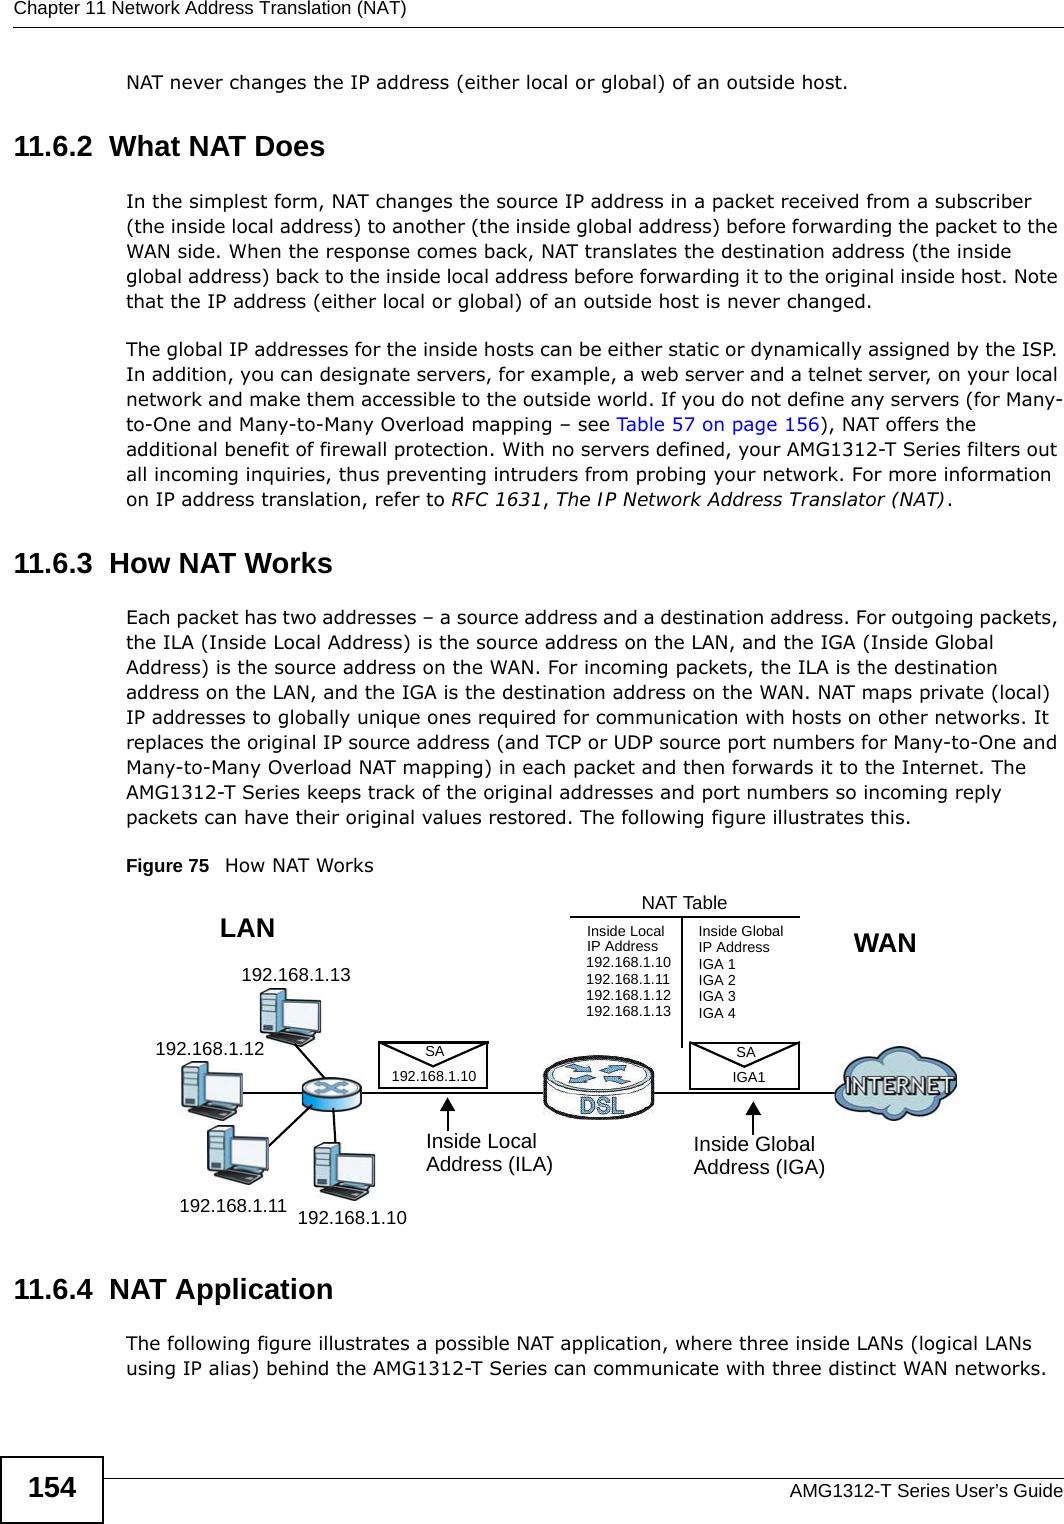 Chapter 11 Network Address Translation (NAT)AMG1312-T Series User’s Guide154NAT never changes the IP address (either local or global) of an outside host.11.6.2  What NAT DoesIn the simplest form, NAT changes the source IP address in a packet received from a subscriber (the inside local address) to another (the inside global address) before forwarding the packet to the WAN side. When the response comes back, NAT translates the destination address (the inside global address) back to the inside local address before forwarding it to the original inside host. Note that the IP address (either local or global) of an outside host is never changed.The global IP addresses for the inside hosts can be either static or dynamically assigned by the ISP. In addition, you can designate servers, for example, a web server and a telnet server, on your local network and make them accessible to the outside world. If you do not define any servers (for Many-to-One and Many-to-Many Overload mapping – see Table 57 on page 156), NAT offers the additional benefit of firewall protection. With no servers defined, your AMG1312-T Series filters out all incoming inquiries, thus preventing intruders from probing your network. For more information on IP address translation, refer to RFC 1631, The IP Network Address Translator (NAT).11.6.3  How NAT WorksEach packet has two addresses – a source address and a destination address. For outgoing packets, the ILA (Inside Local Address) is the source address on the LAN, and the IGA (Inside Global Address) is the source address on the WAN. For incoming packets, the ILA is the destination address on the LAN, and the IGA is the destination address on the WAN. NAT maps private (local) IP addresses to globally unique ones required for communication with hosts on other networks. It replaces the original IP source address (and TCP or UDP source port numbers for Many-to-One and Many-to-Many Overload NAT mapping) in each packet and then forwards it to the Internet. The AMG1312-T Series keeps track of the original addresses and port numbers so incoming reply packets can have their original values restored. The following figure illustrates this.Figure 75   How NAT Works11.6.4  NAT ApplicationThe following figure illustrates a possible NAT application, where three inside LANs (logical LANs using IP alias) behind the AMG1312-T Series can communicate with three distinct WAN networks.192.168.1.13192.168.1.10192.168.1.11192.168.1.12 SA192.168.1.10SAIGA1Inside LocalIP Address192.168.1.10192.168.1.11192.168.1.12192.168.1.13Inside Global IP AddressIGA 1IGA 2IGA 3IGA 4NAT TableWANLANInside LocalAddress (ILA) Inside GlobalAddress (IGA)